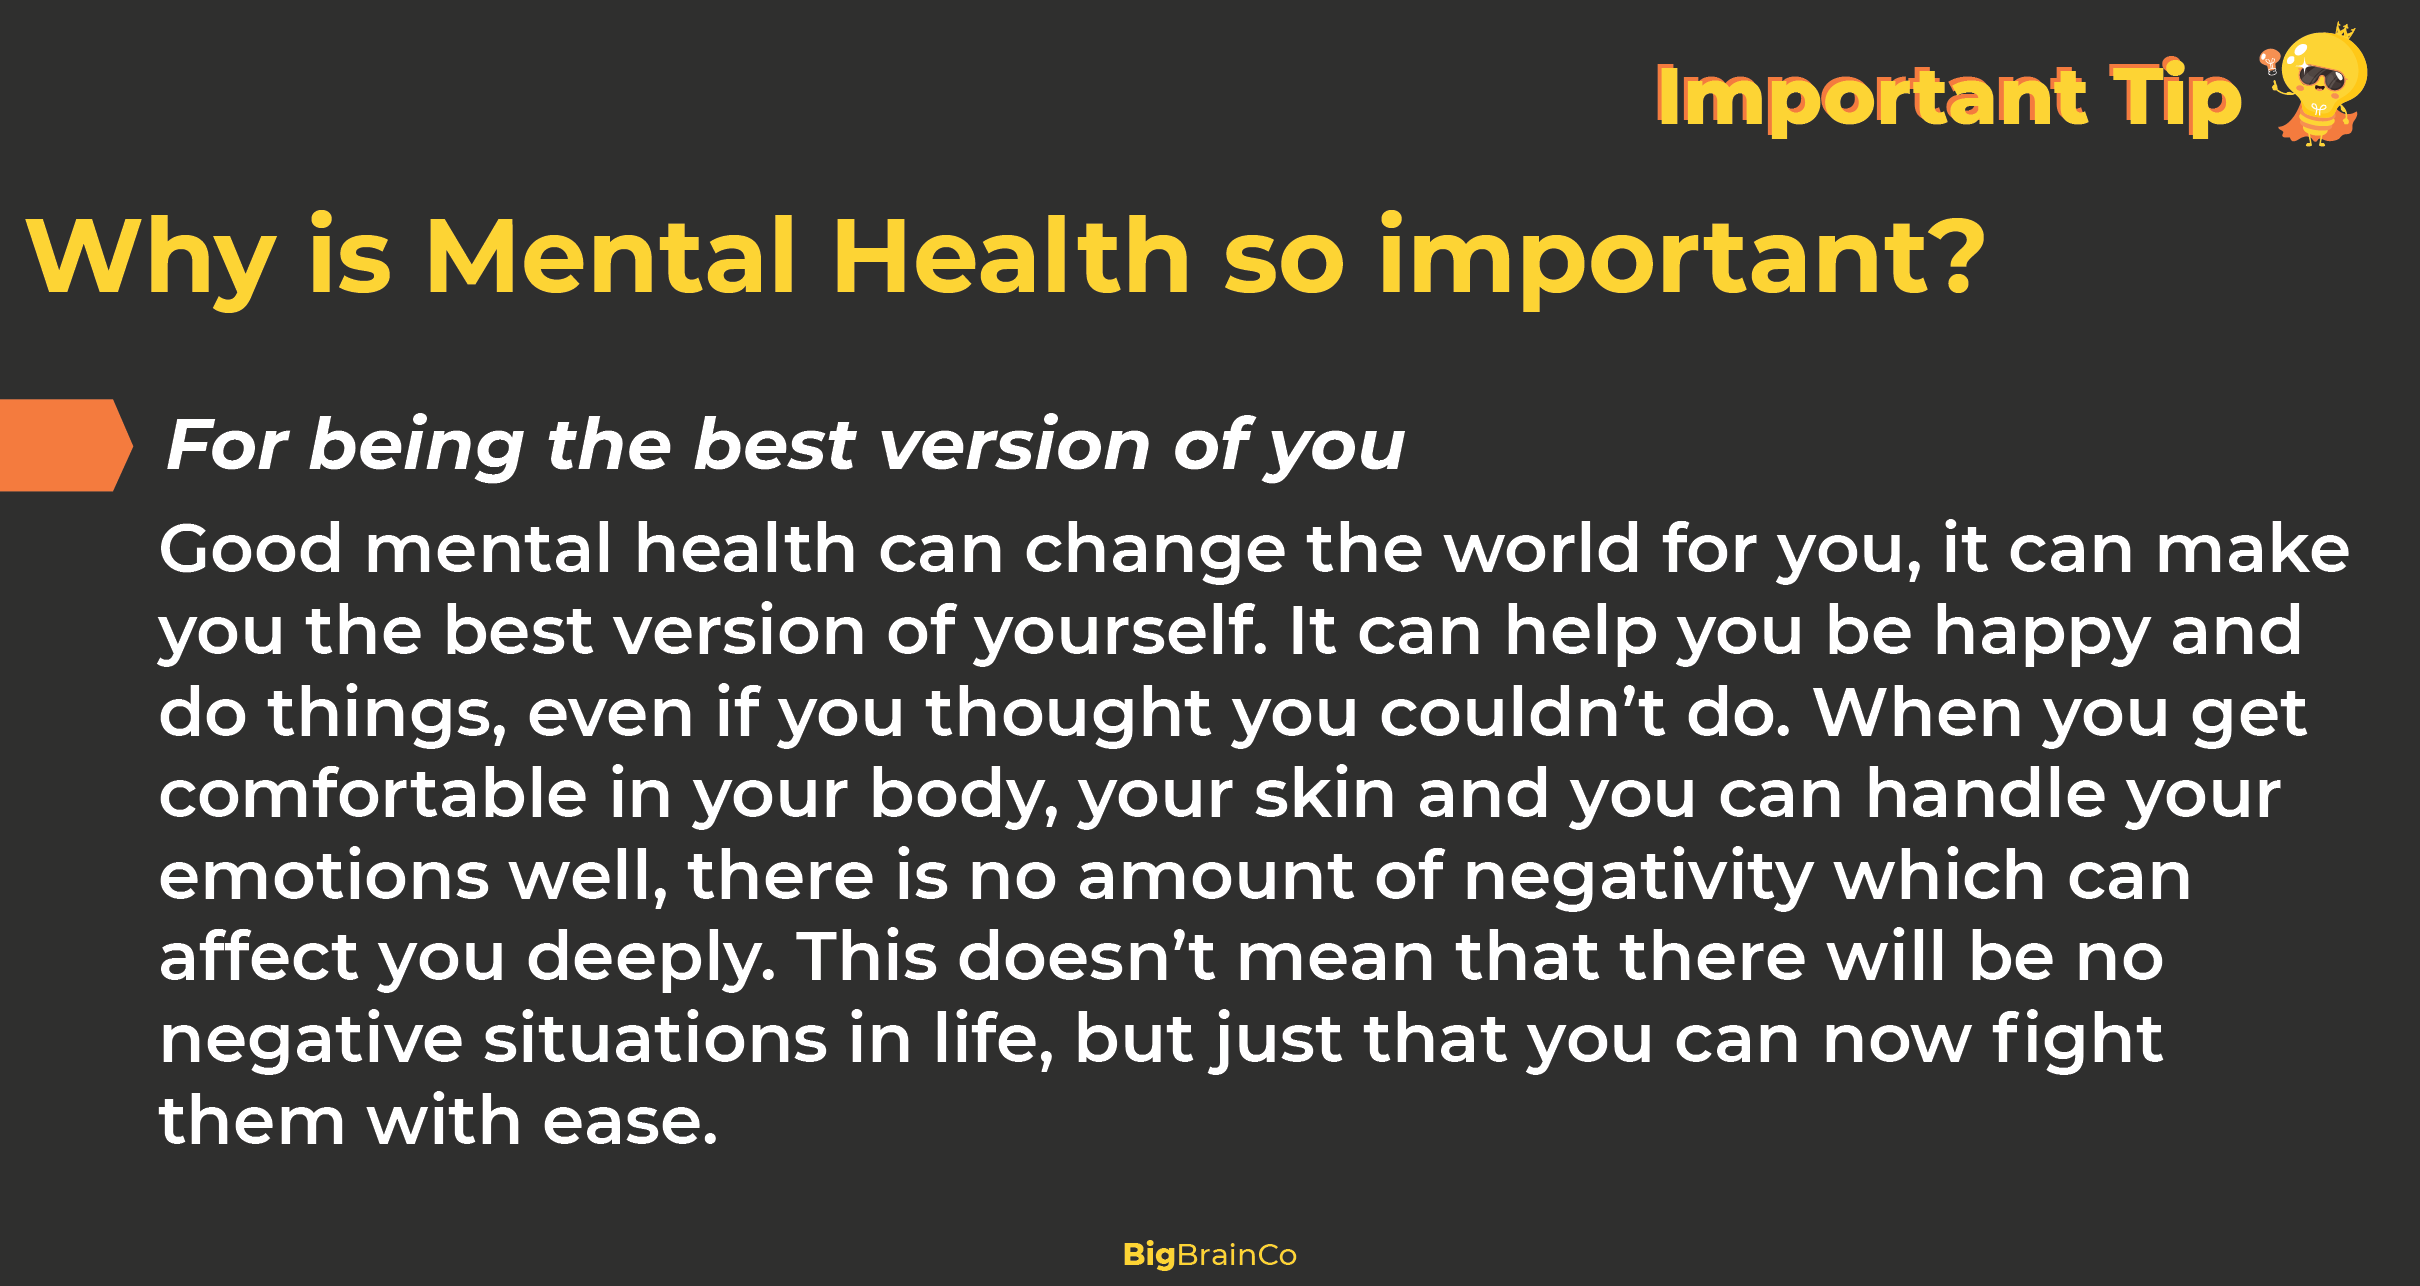 Reasons why mental health is important